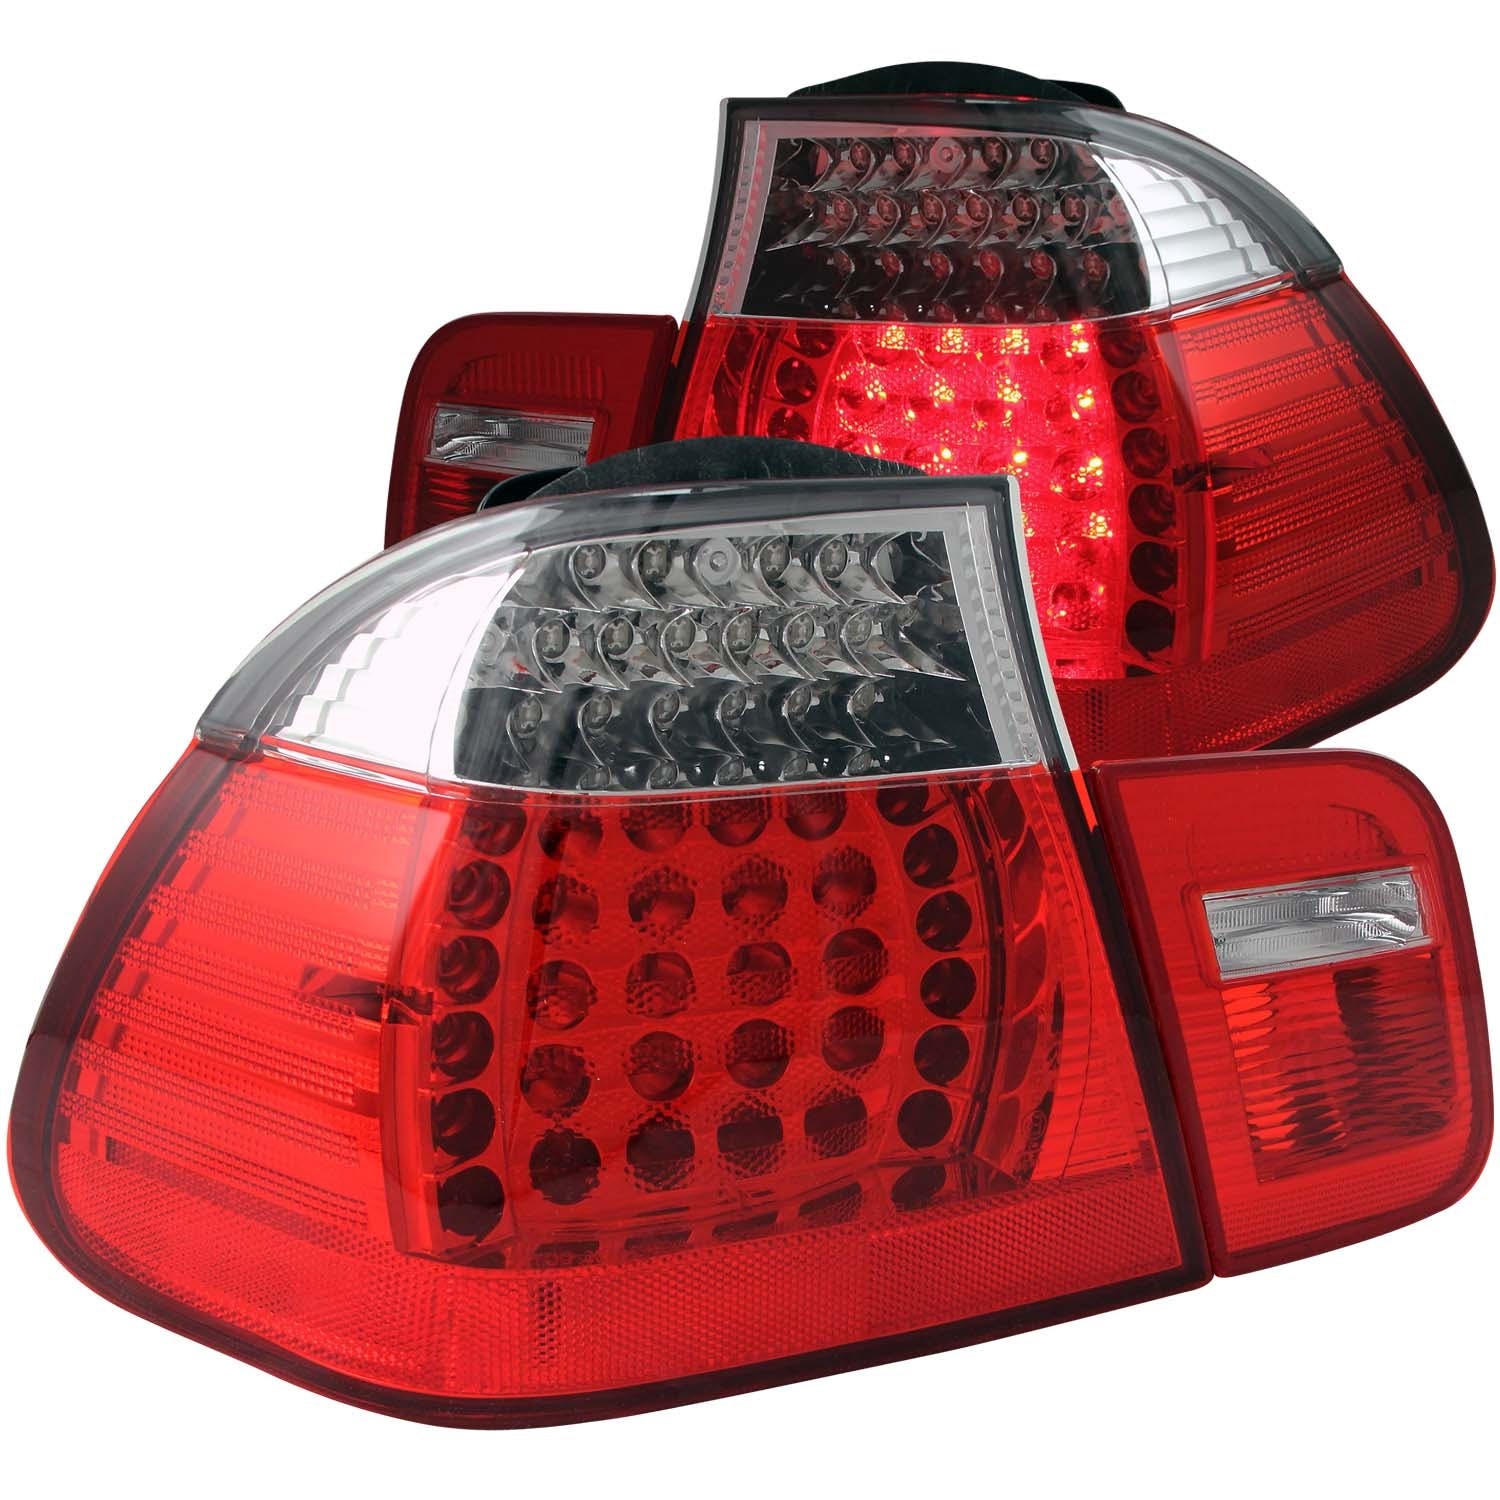 AnzoUSA 321096 LED Taillights Red/Clear